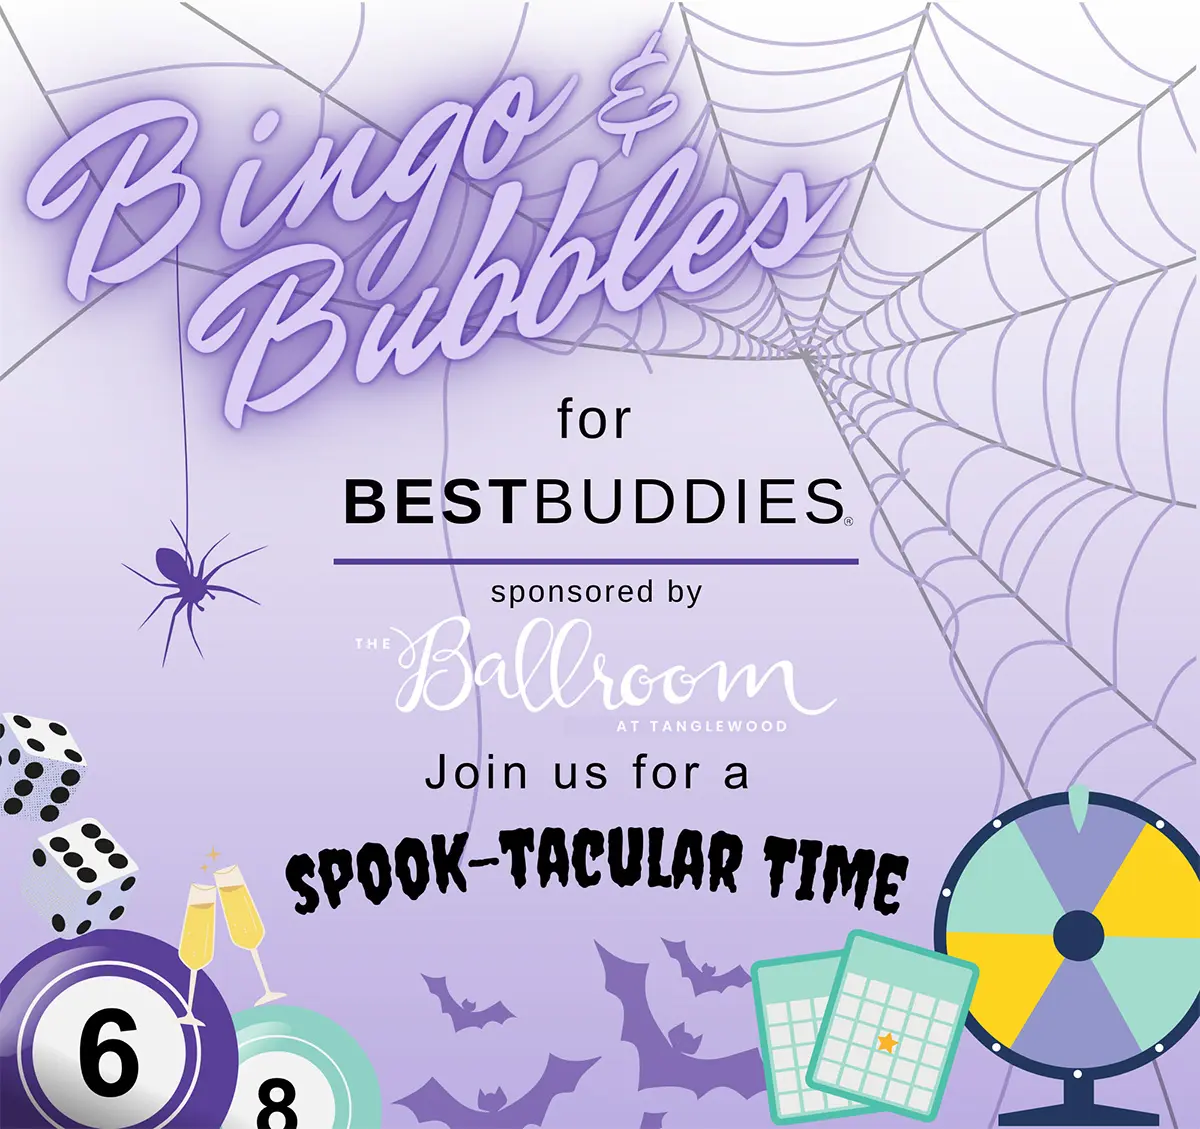 Bingo and Bubbles for Best Buddies